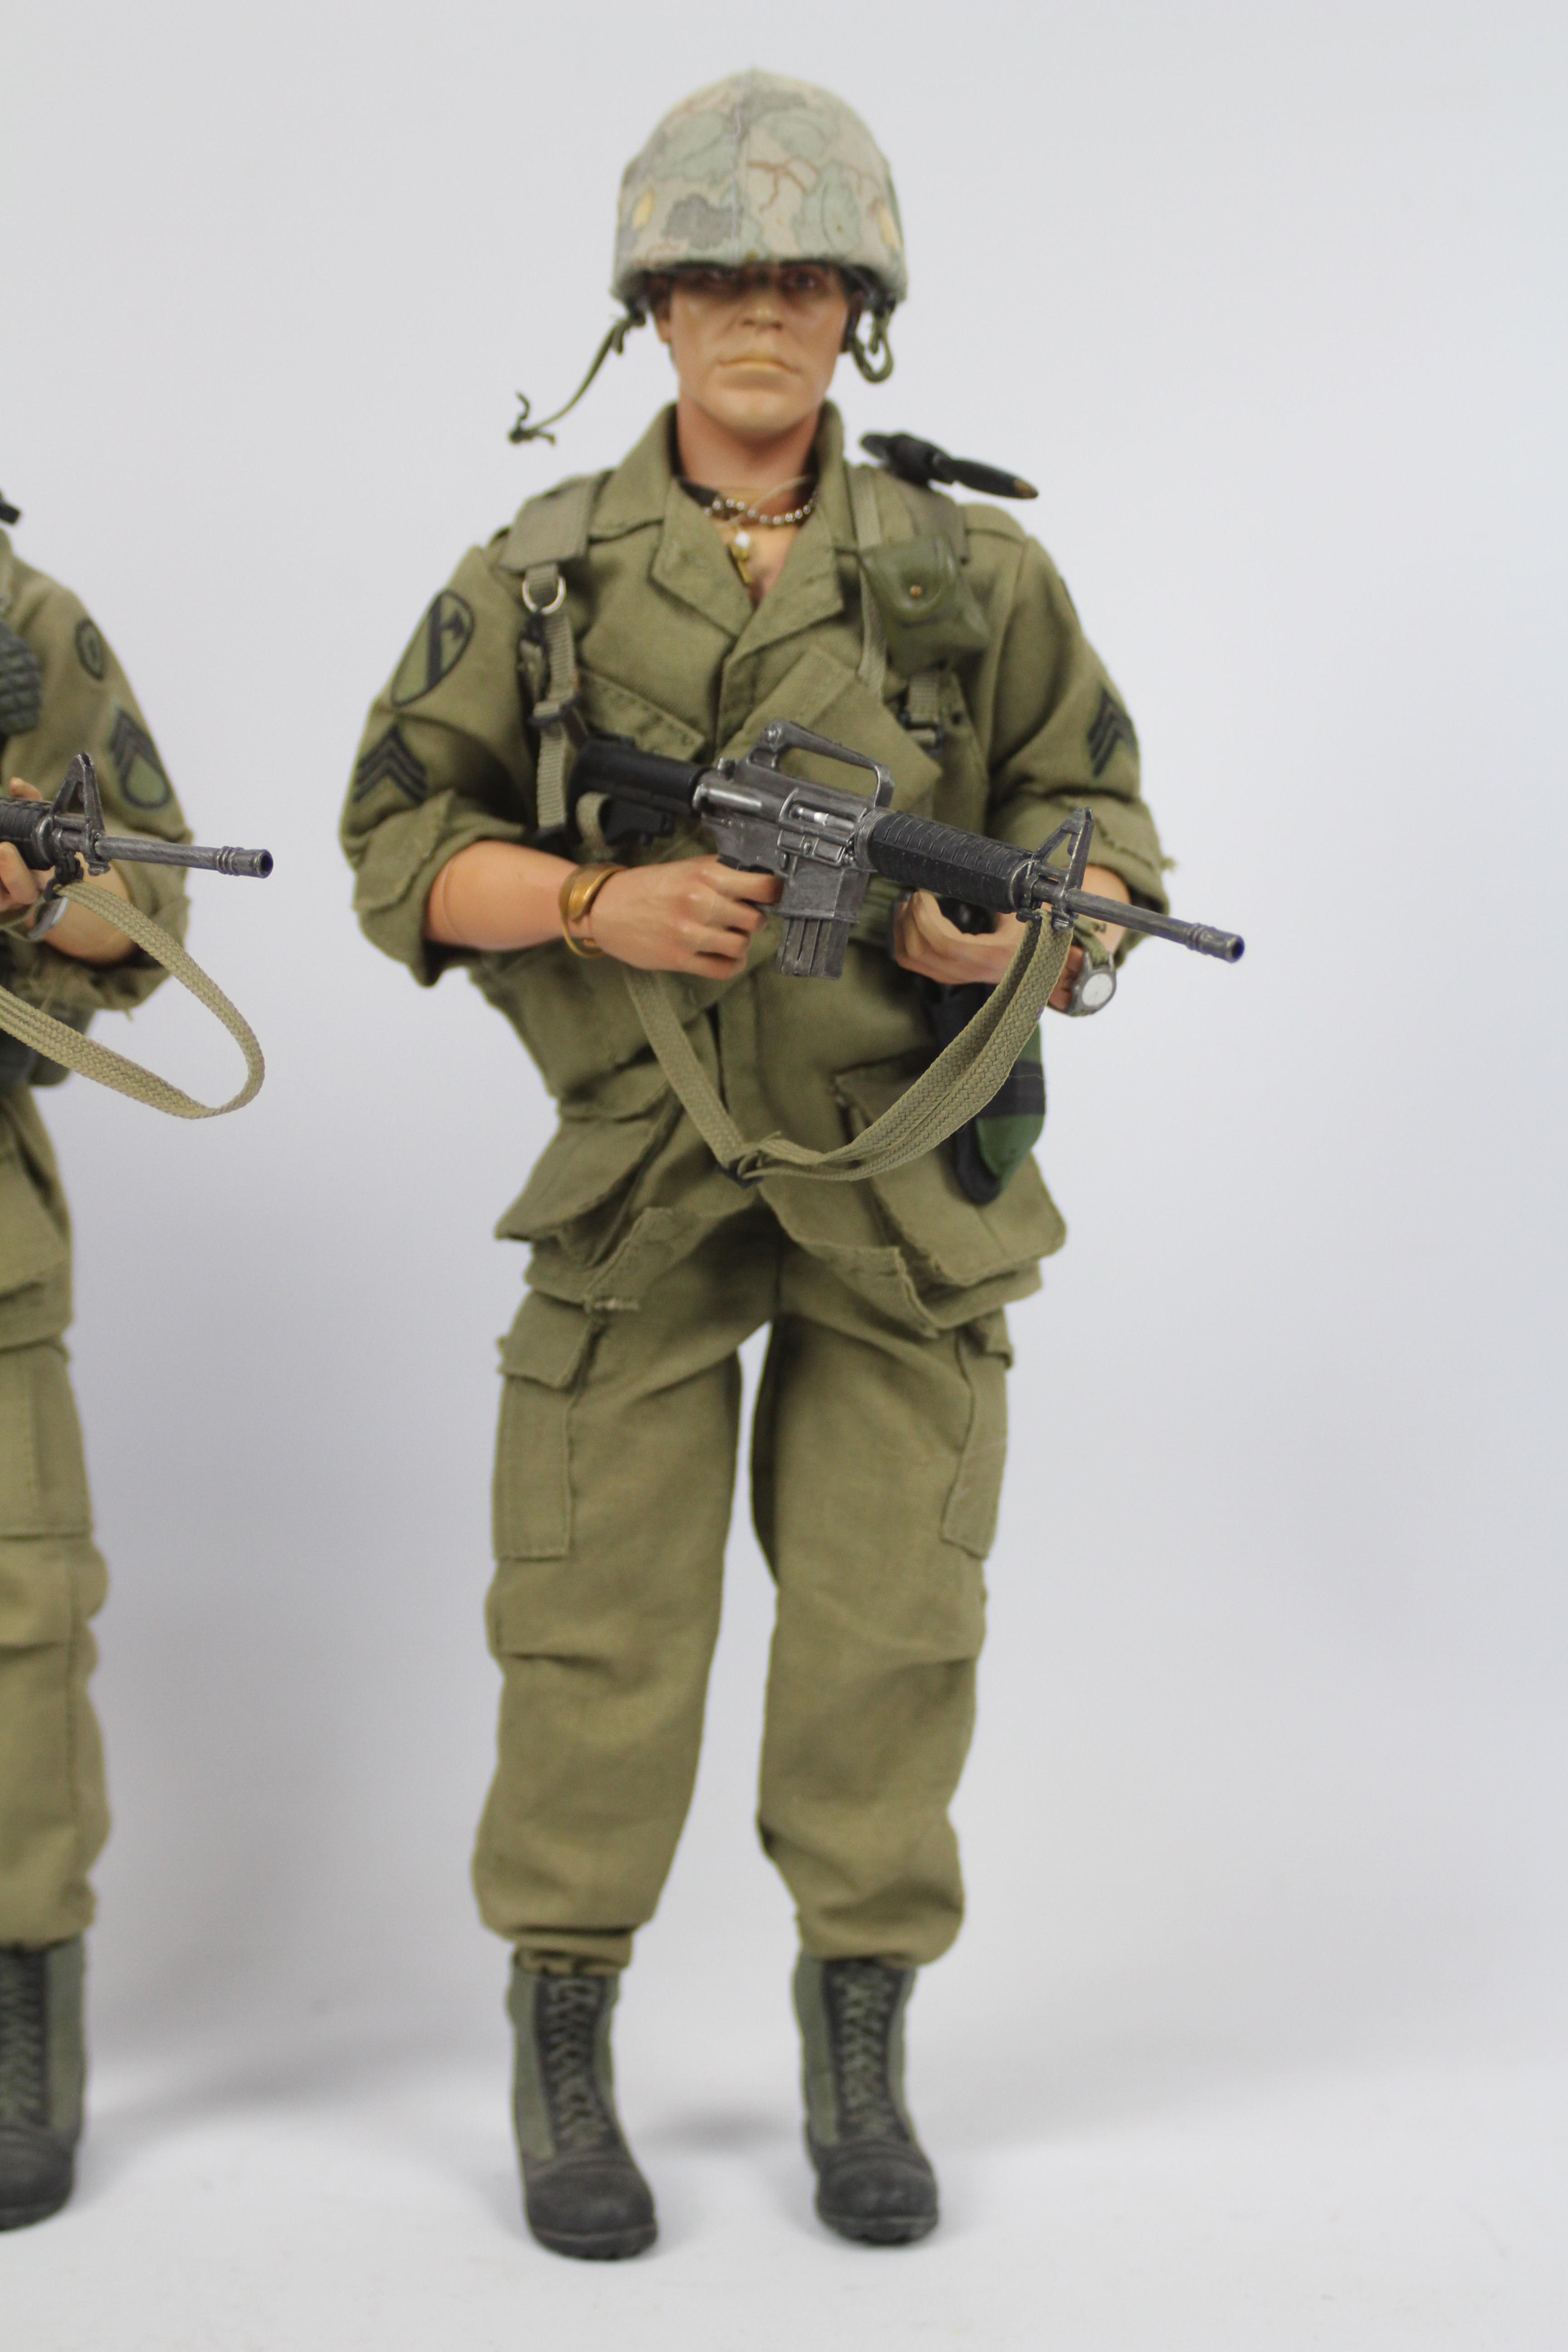 Sideshow Collectibles - Three unboxed 1:6 scale action figures from Sideshows 'Platoon' series, - Image 4 of 8